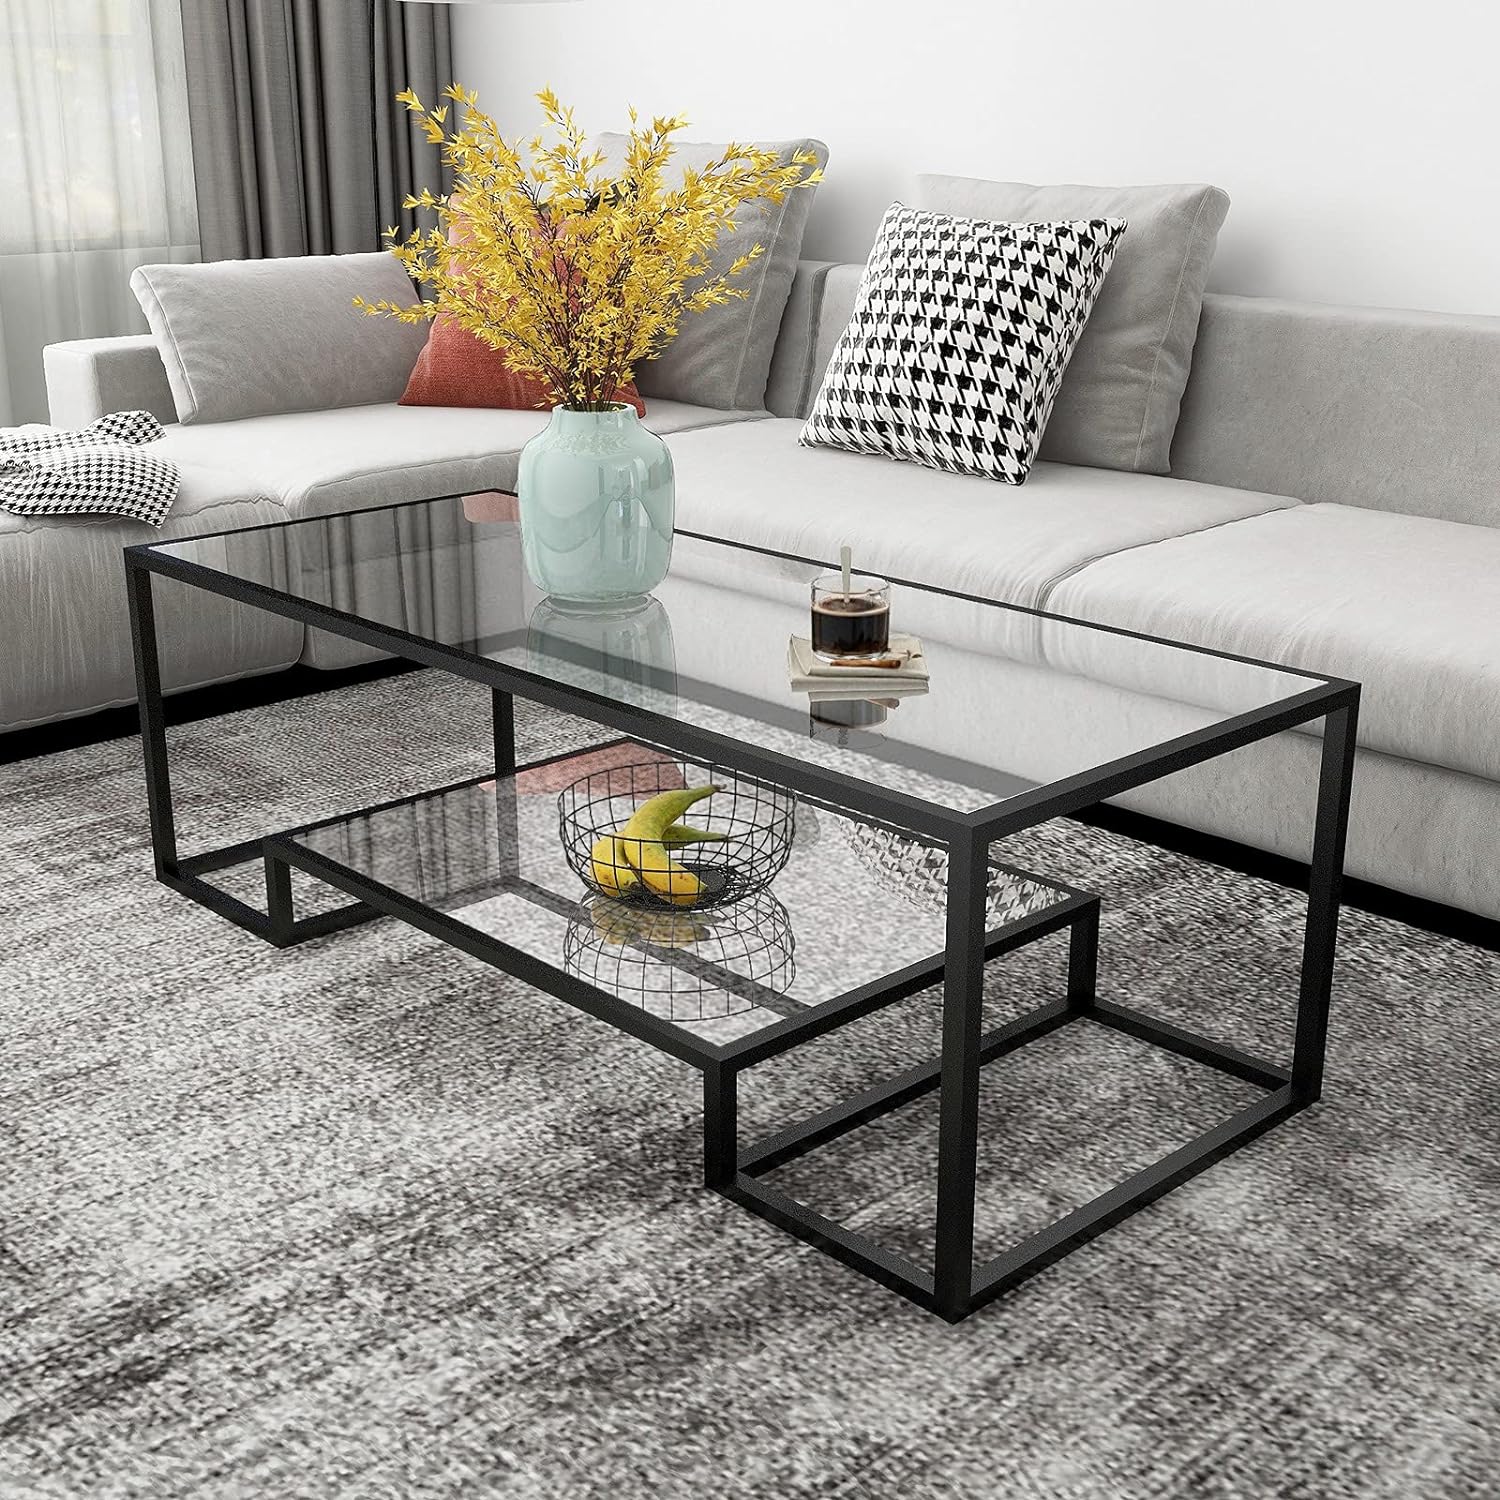 Metal Glass Coffee Table, Black Accent Modern Tempered Glass Side Table, Additional Storage Shelf, for Living Room Home Classy Furniture Office Decor